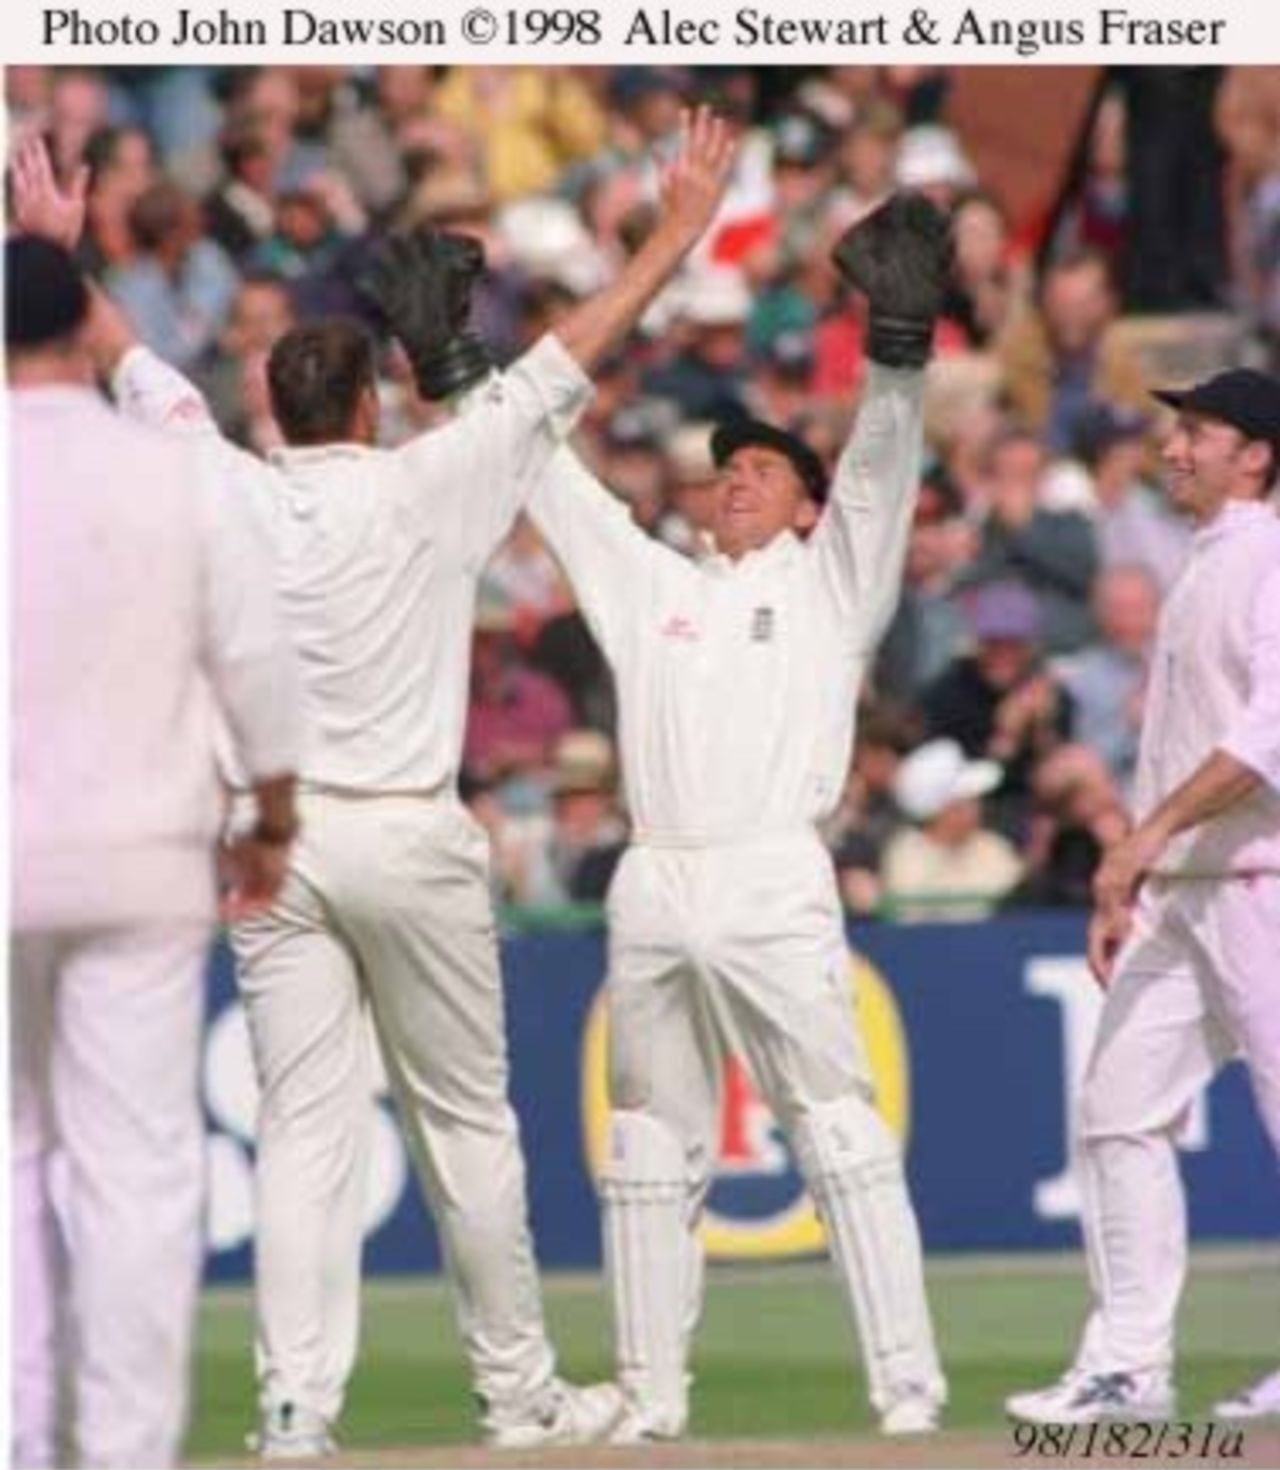 Alec Stewart and Angus Fraser celebrate another wicket